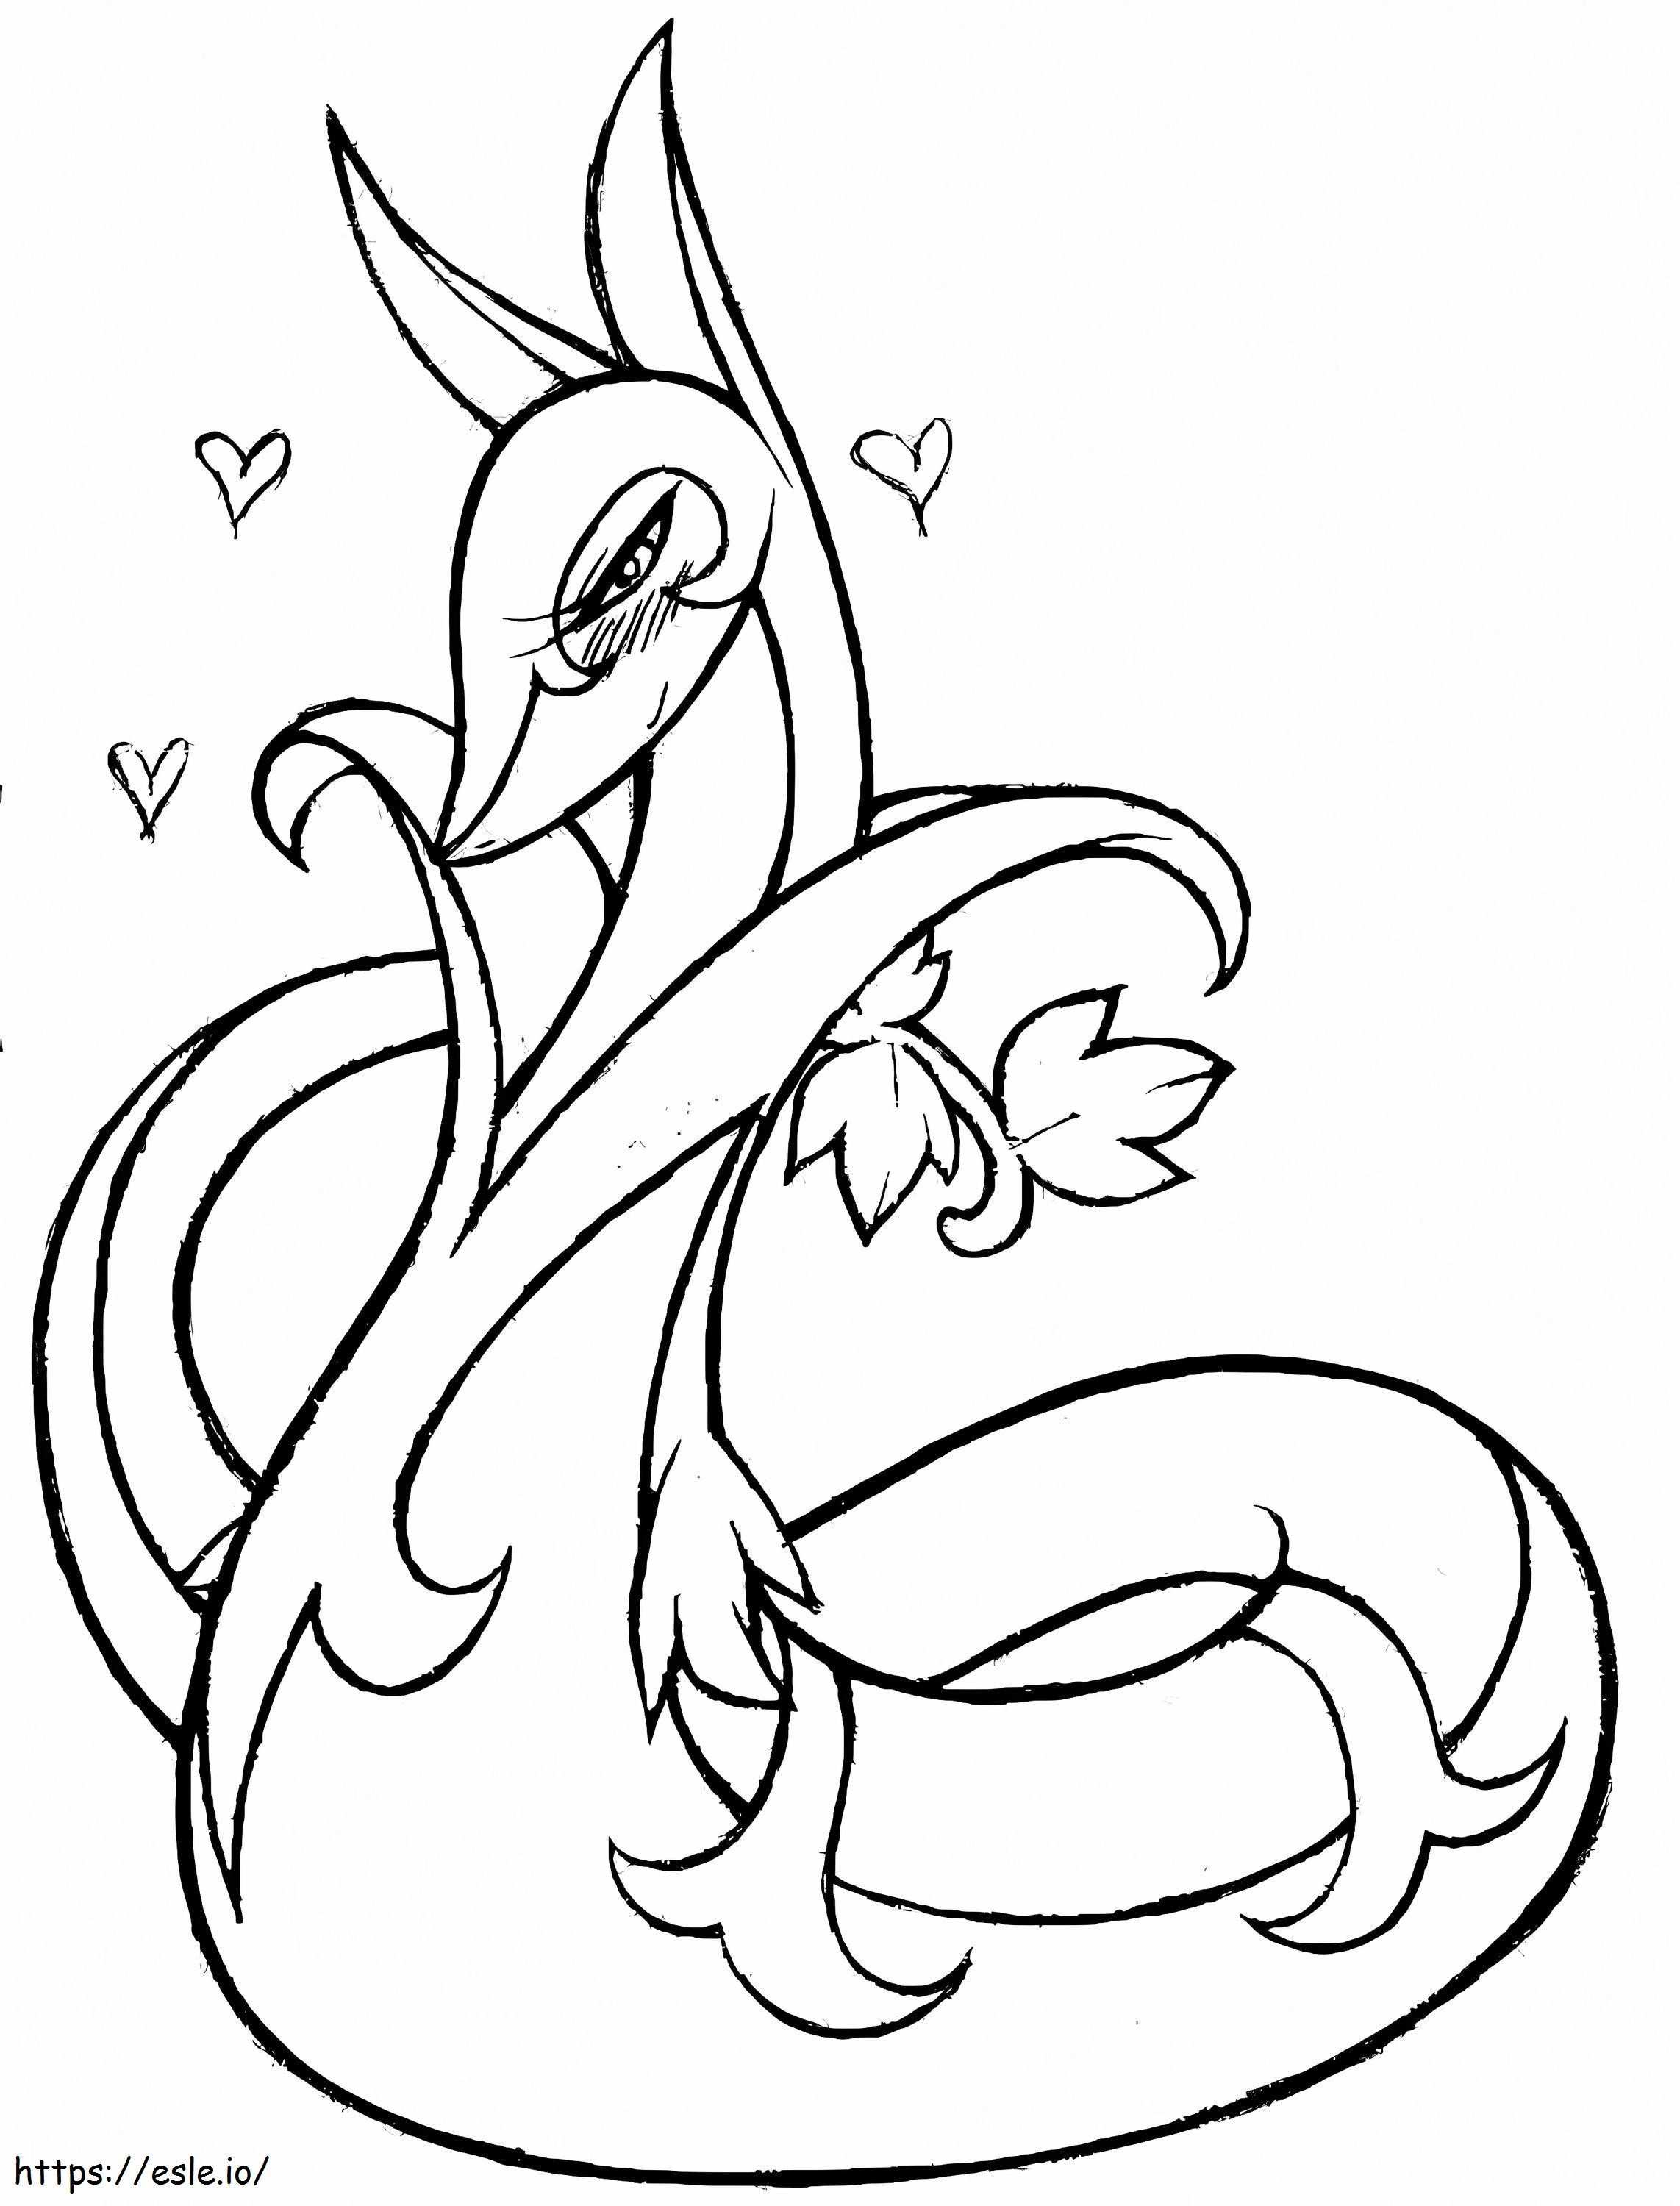 Lovely Serperior coloring page